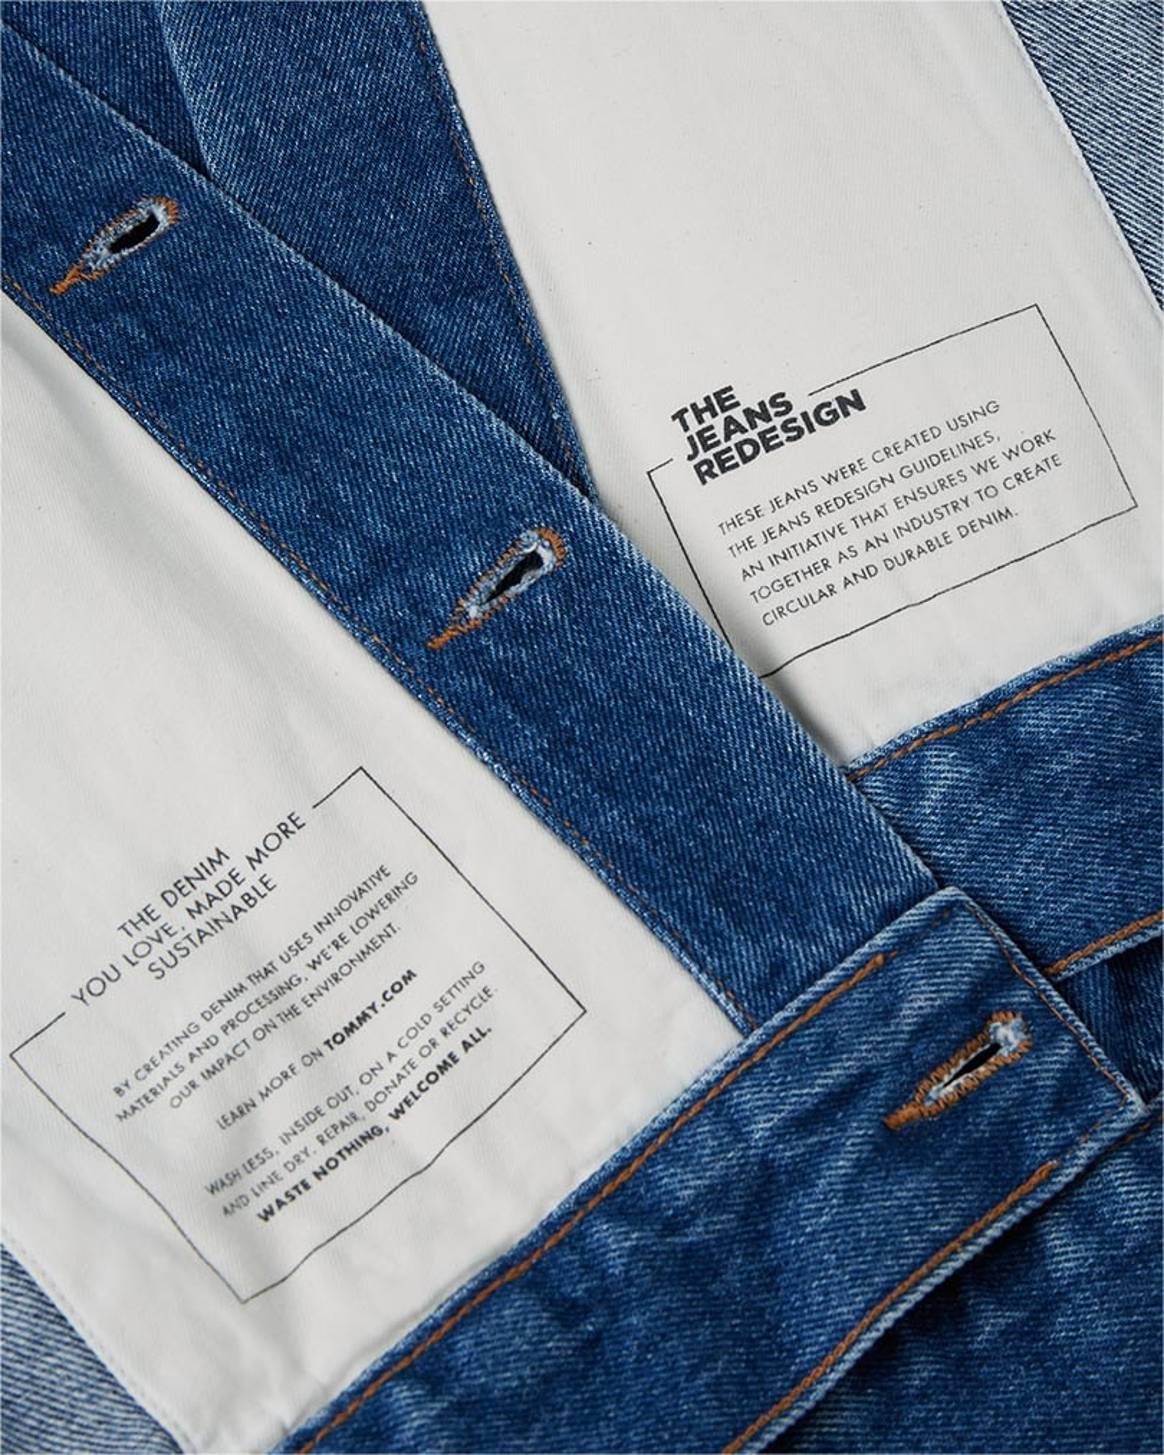 Tommy Hilfiger launches first circular denim collection